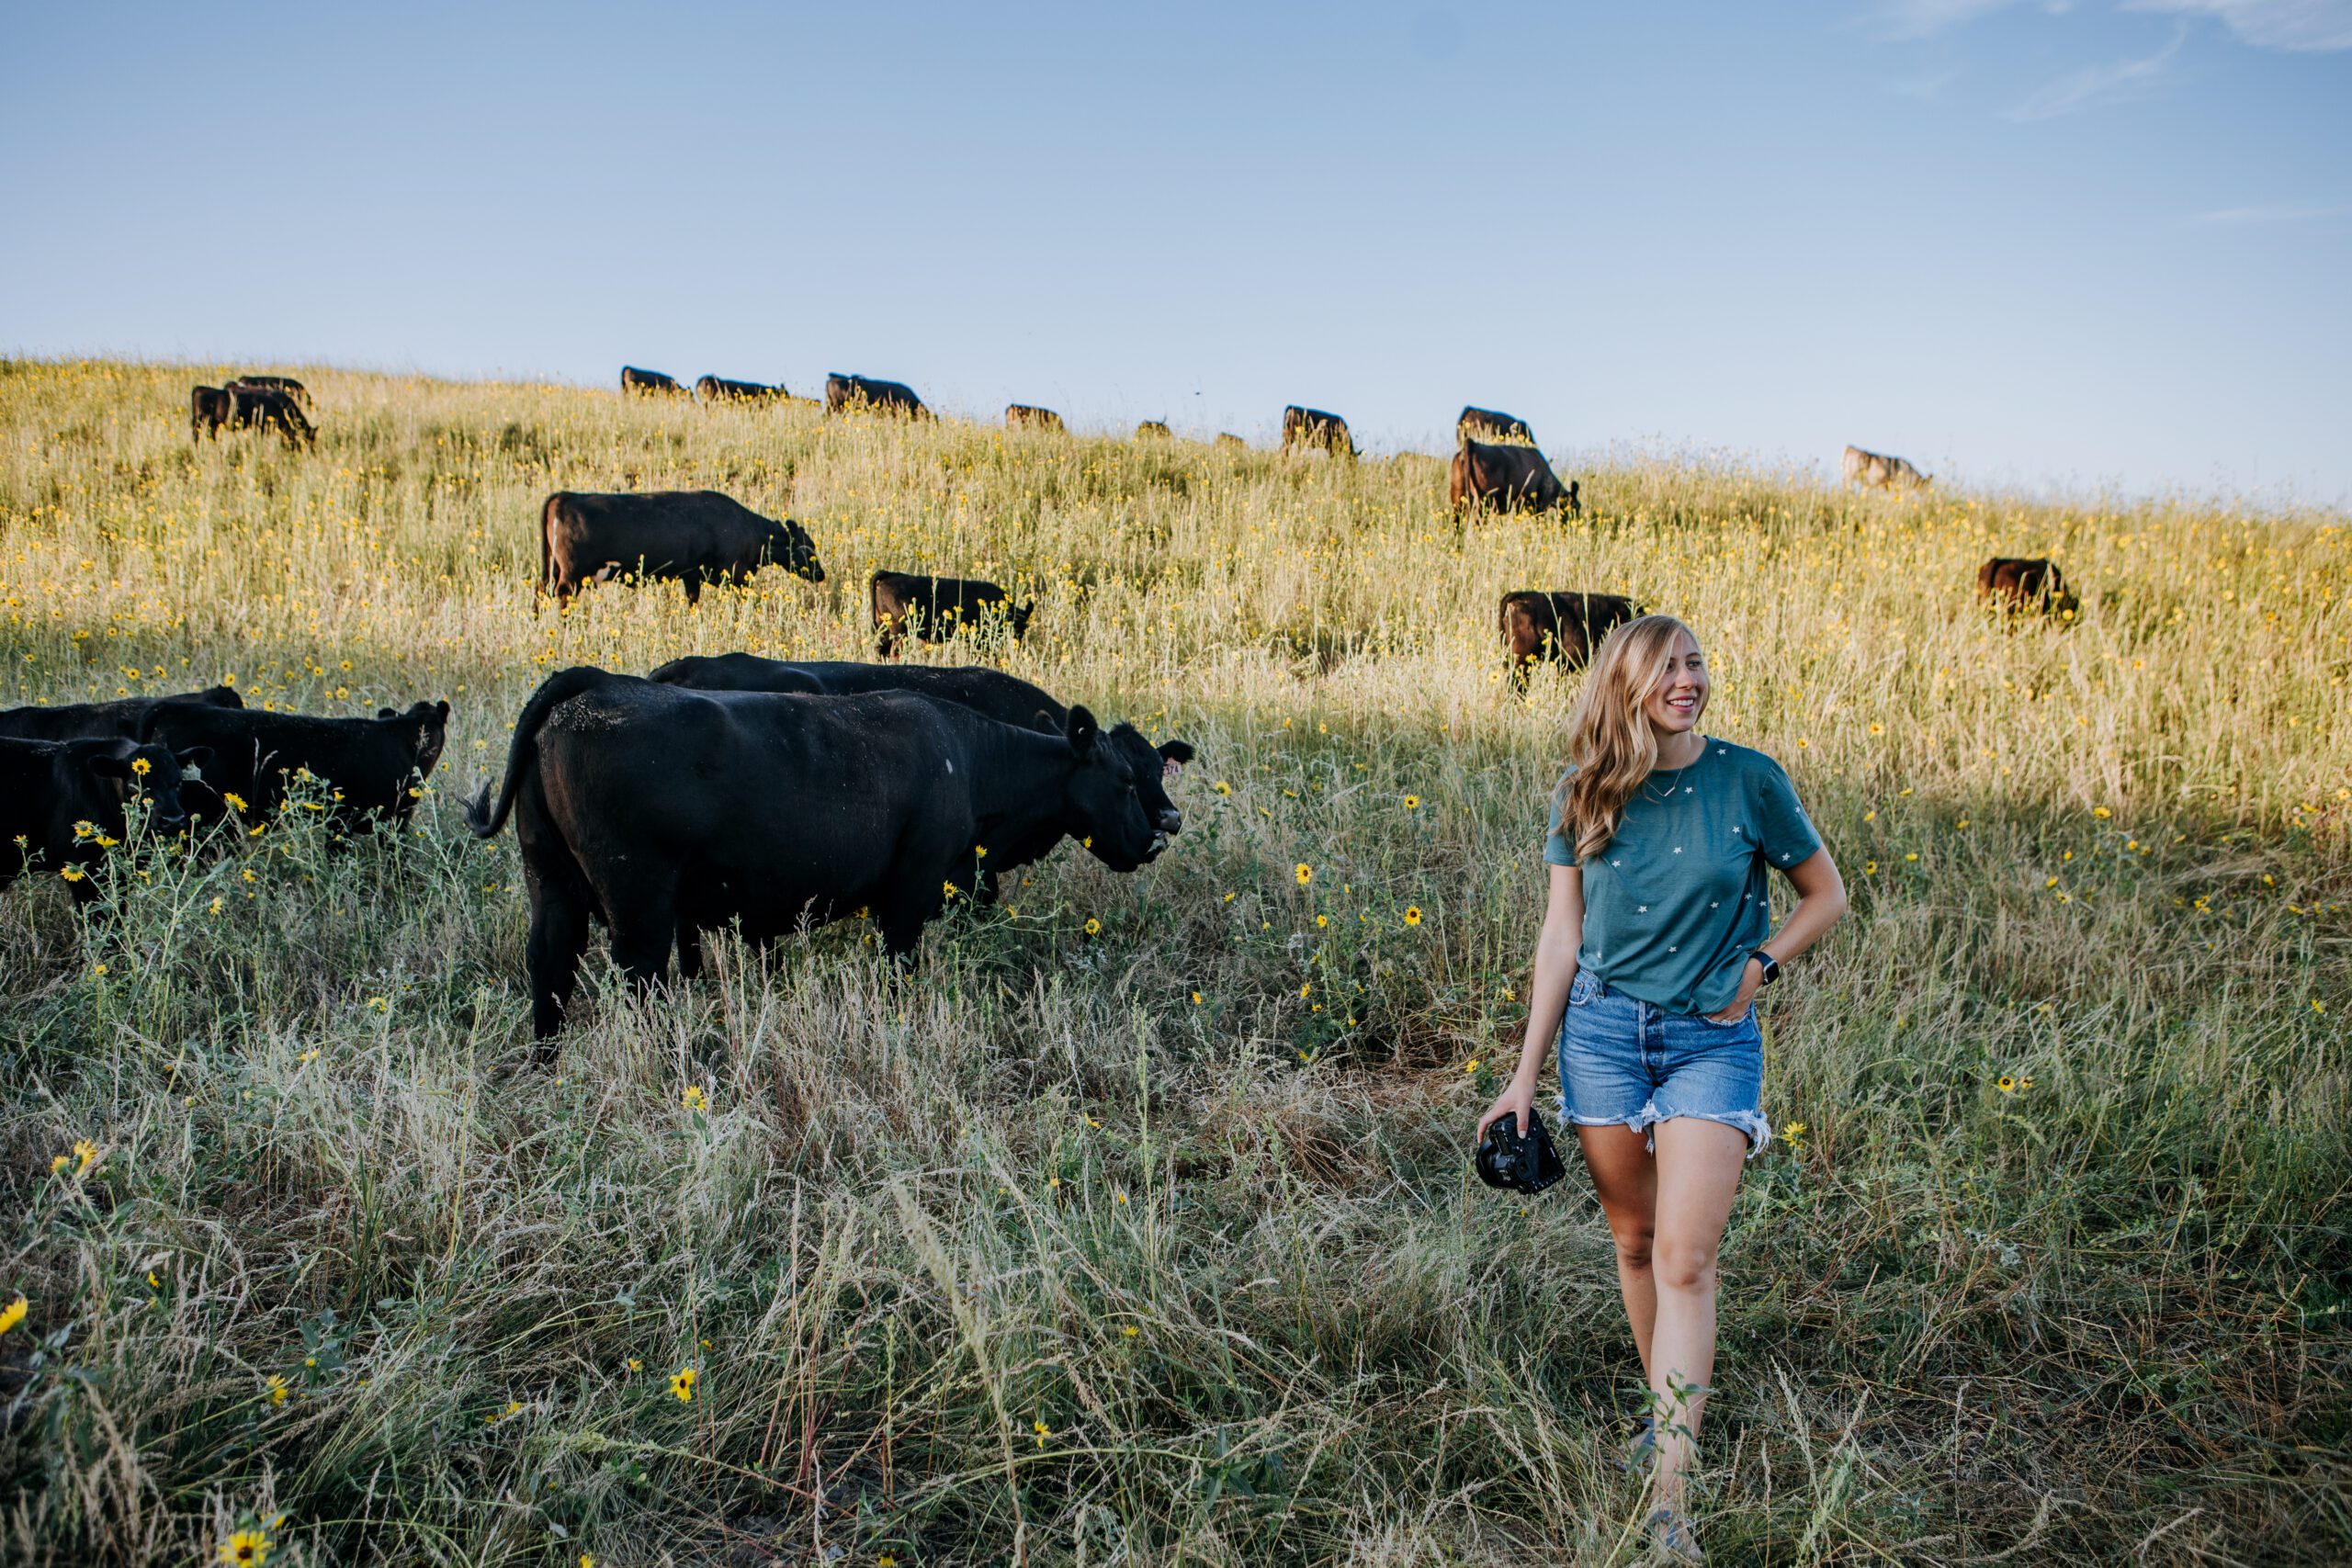 photographer walking through a pasture with cattle